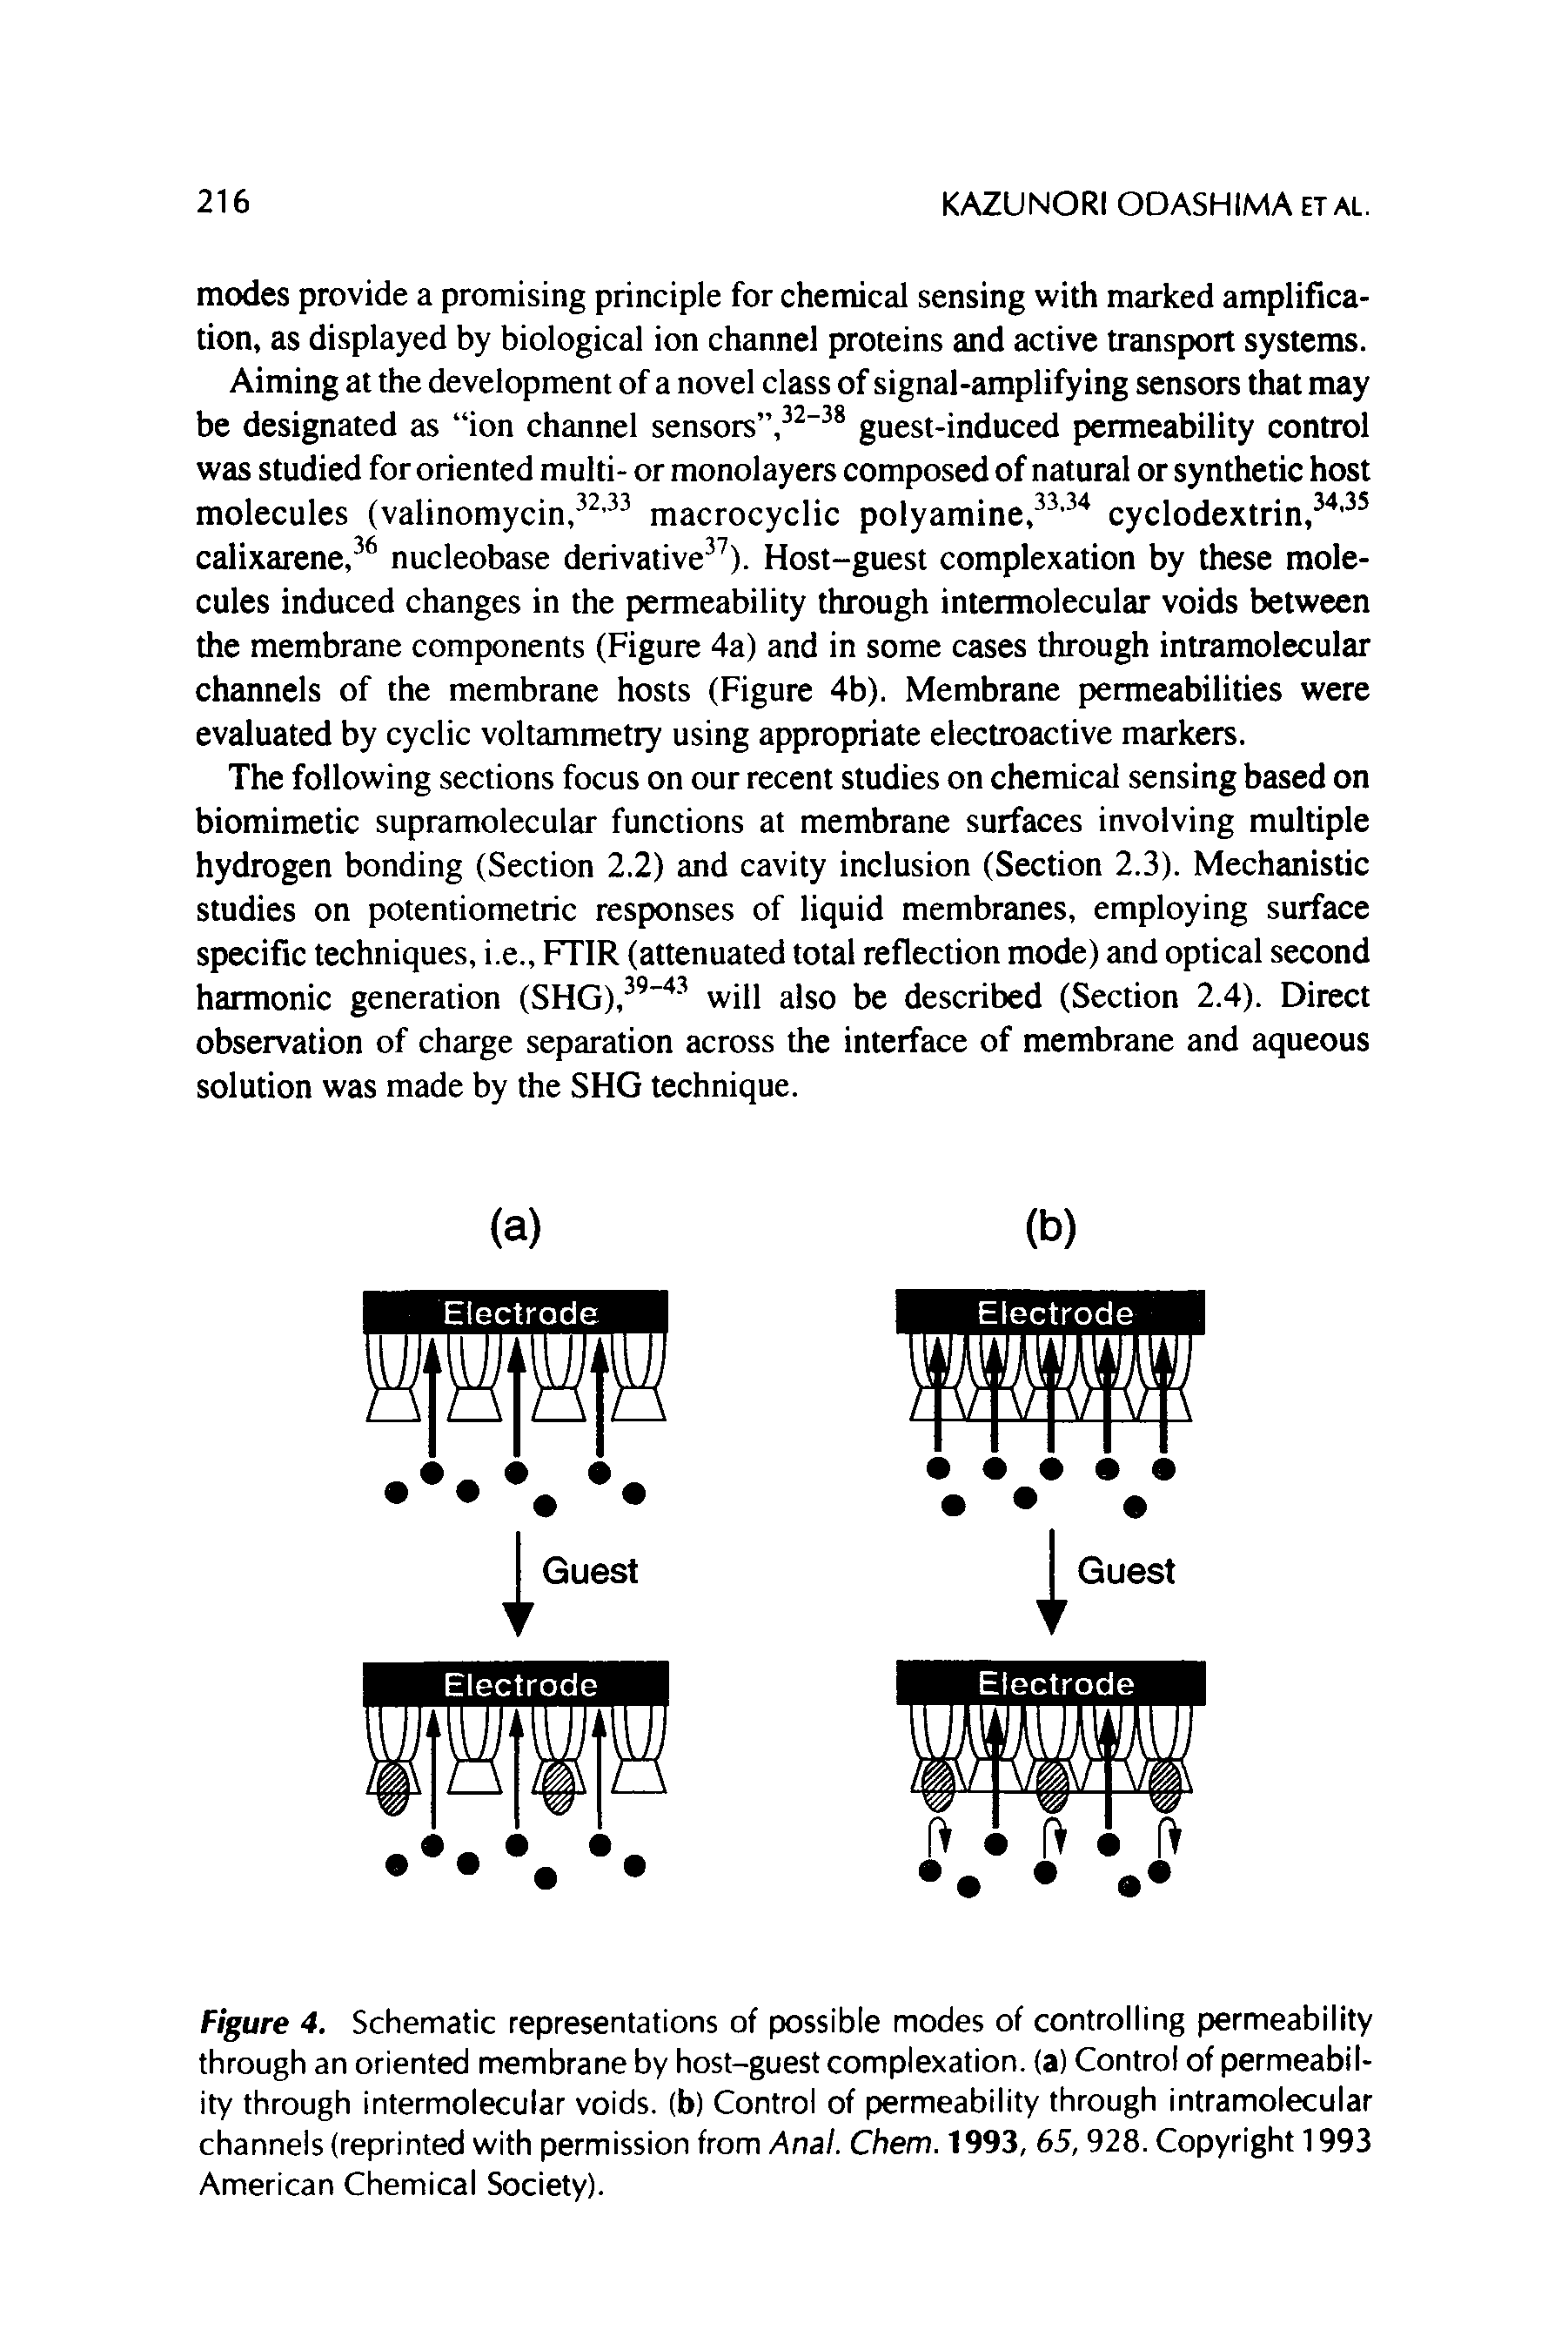 Figure 4. Schematic representations of possible modes of controlling permeability through an oriented membrane by host-guest complexation. (a) Control of permeability through intermolecular voids, (b) Control of permeability through intramolecular channels (reprinted with permission from Anal. Chem. 1993, 65,928. Copyright 1993 American Chemical Society).